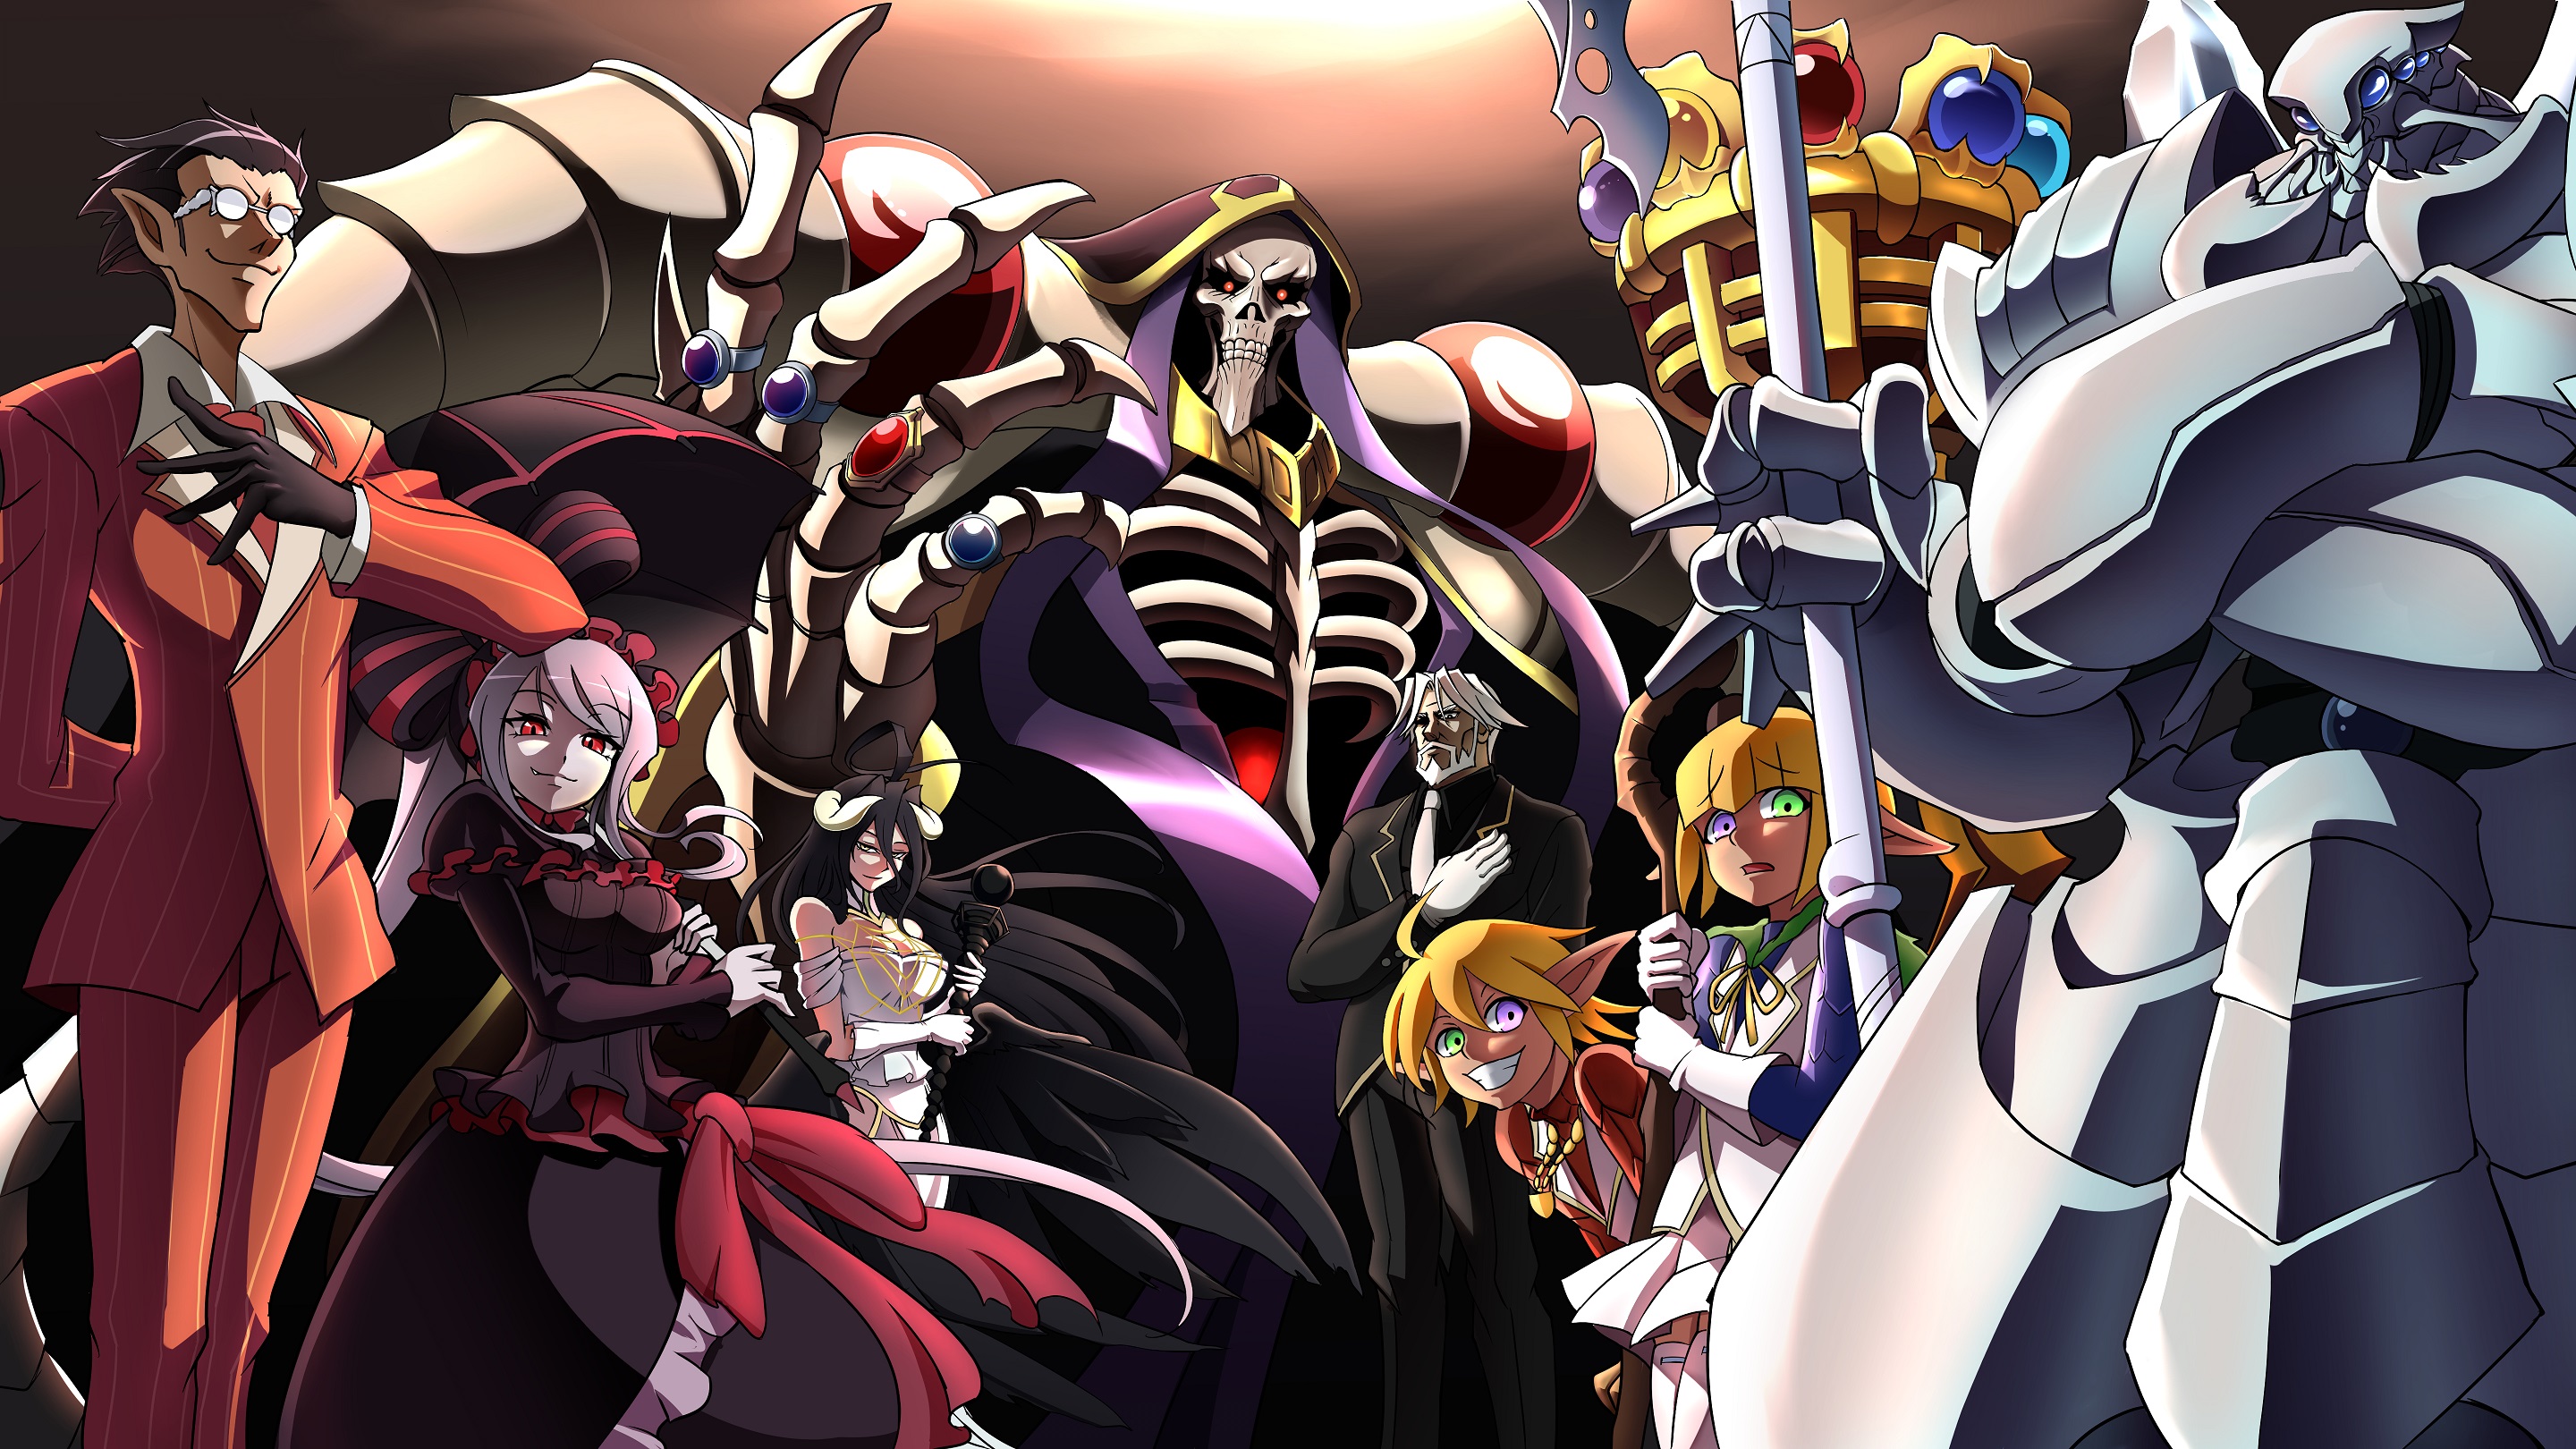 Anime Overlord HD Wallpaper by Great (Pixiv)